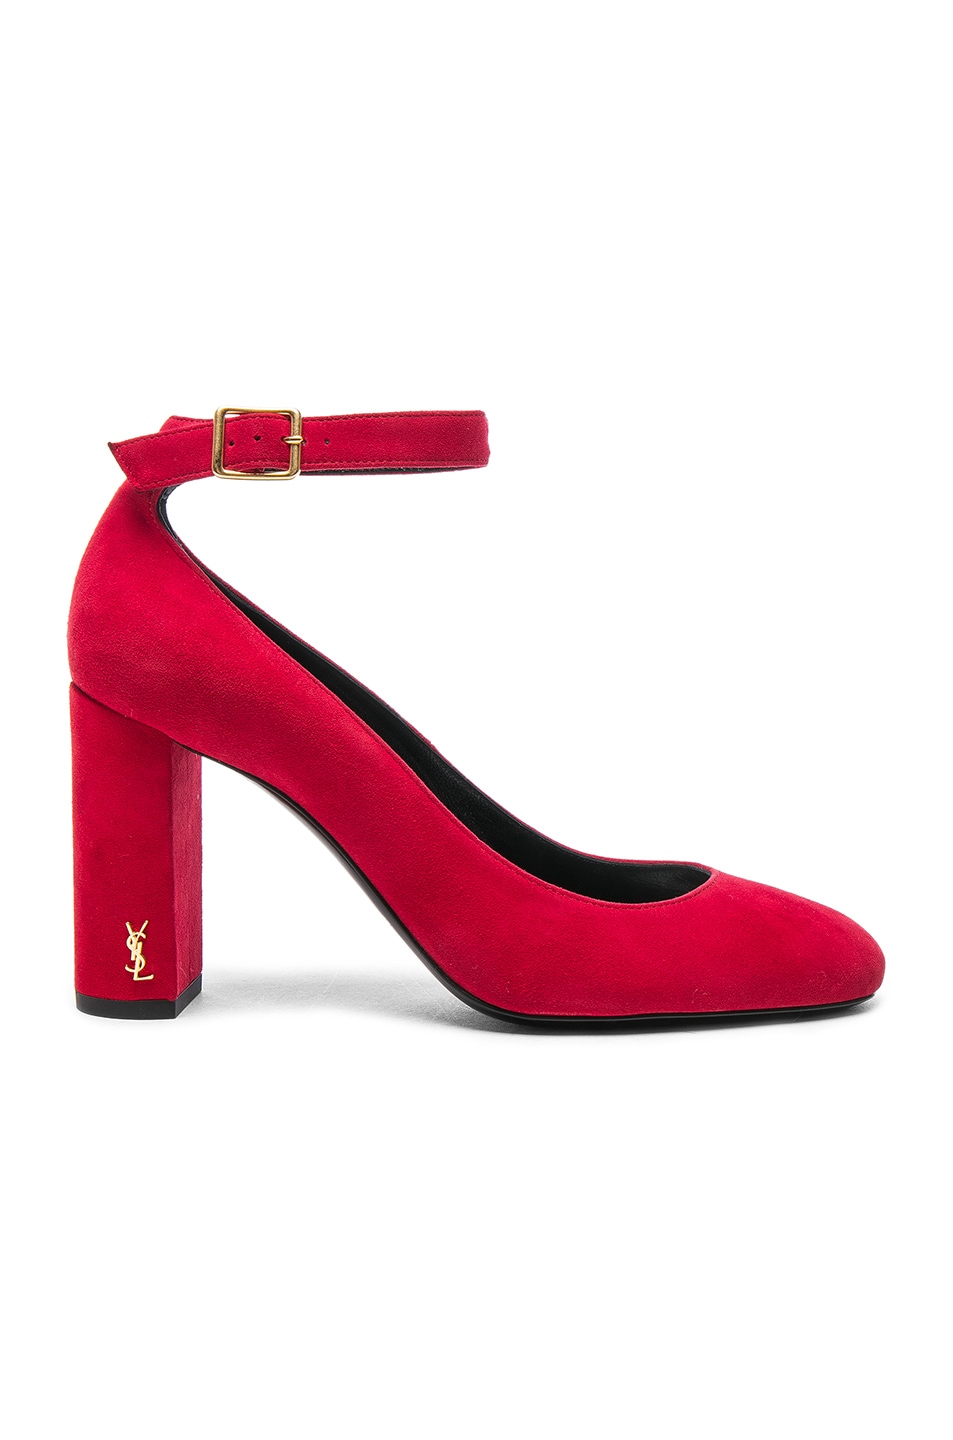 Image 1 of Saint Laurent Loulou Suede Ankle Strap Pumps in Bright Red